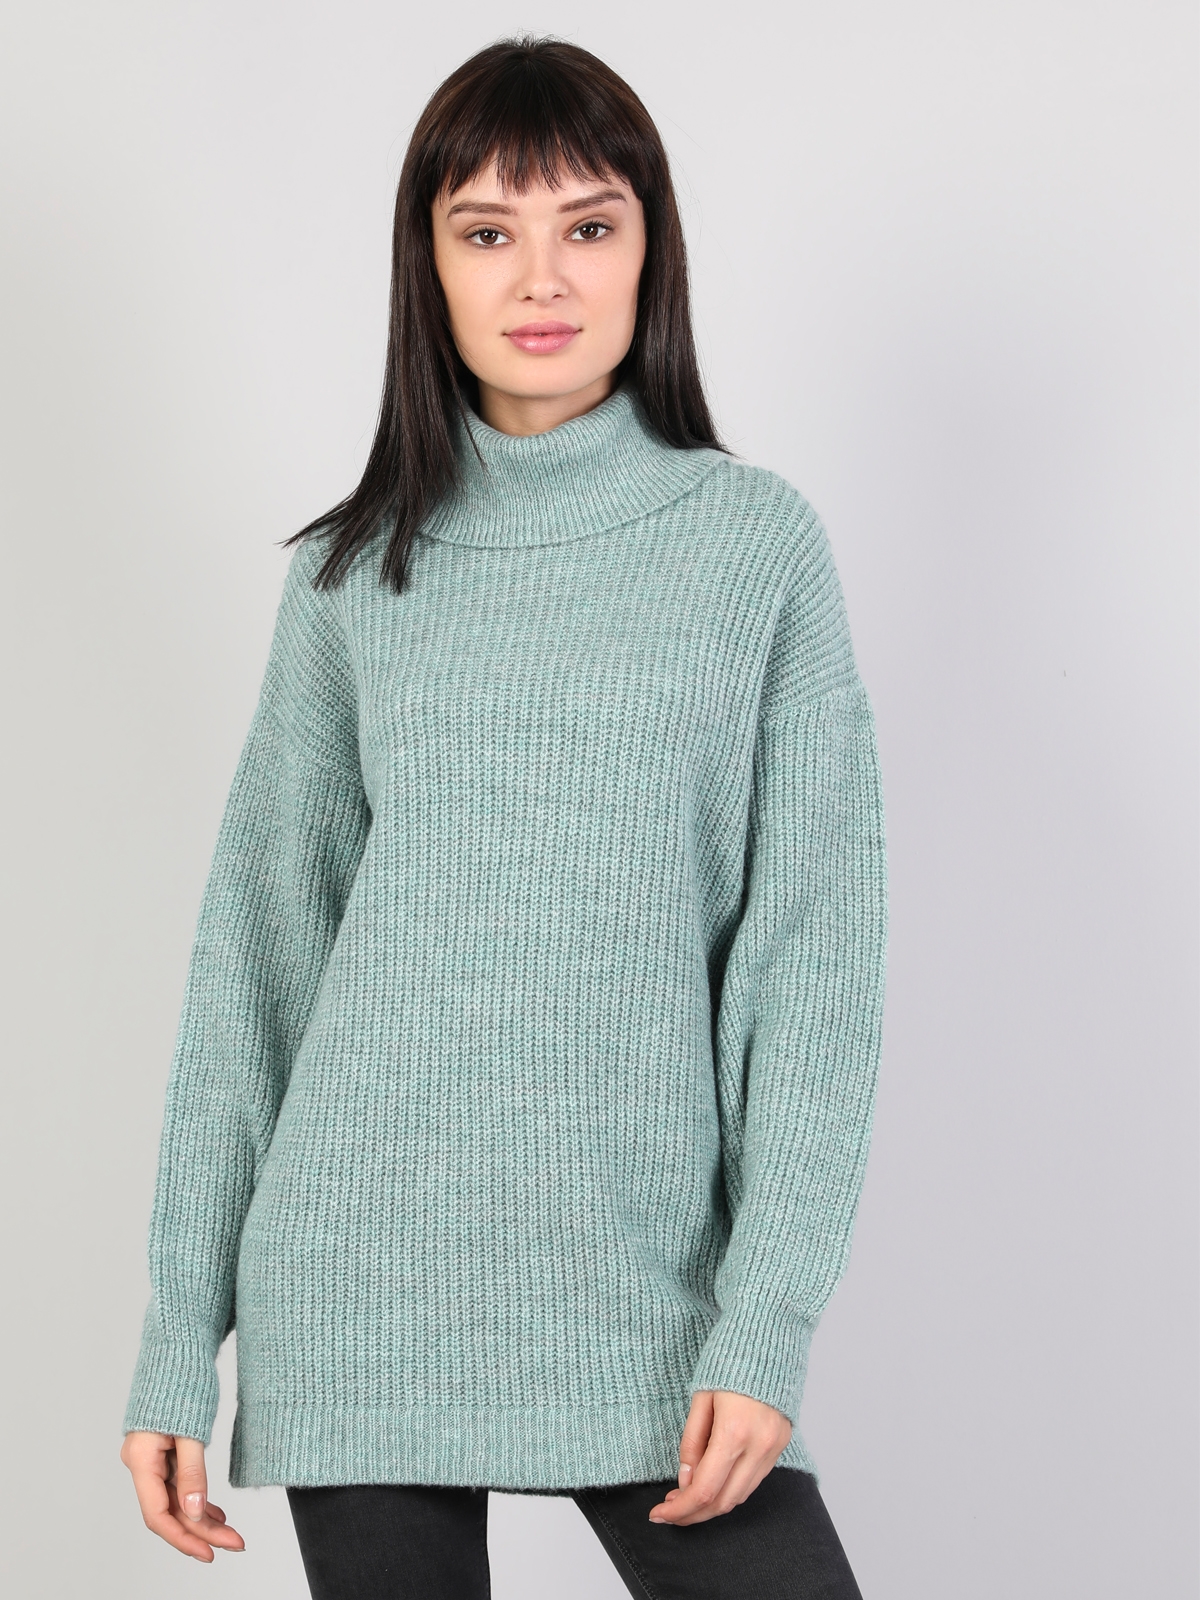 Colins Turquıse Woman Sweaters. 1